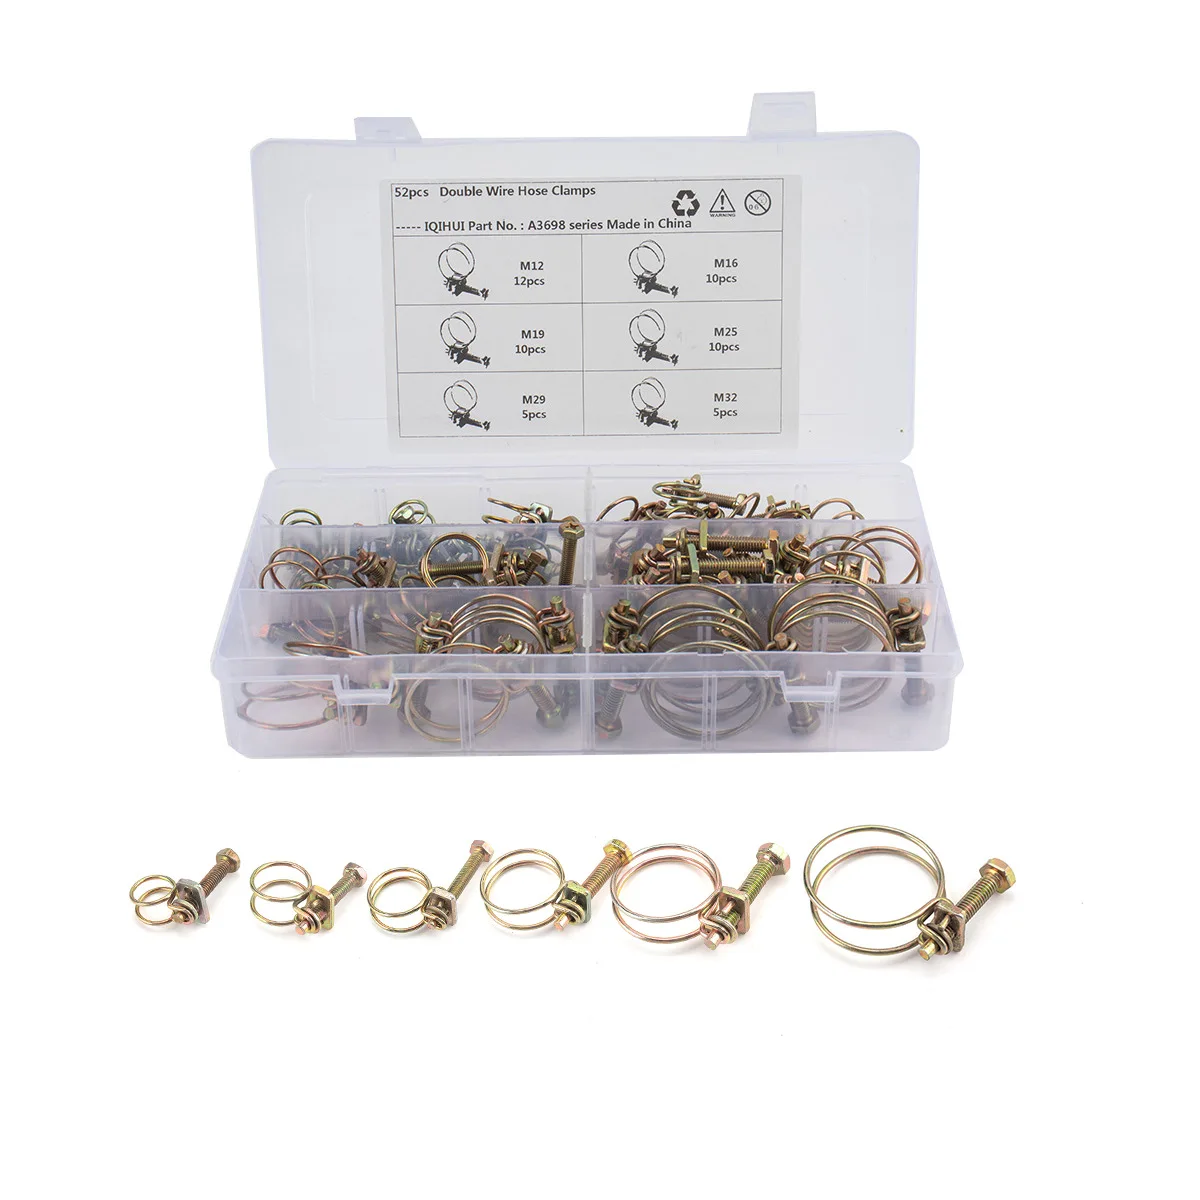 

52Pcs/1Lot M12/16/19/25/29/32 Adjustable Pipe Clamp Double Wire Hose Clip Plumbing Fastener Hardware Kit